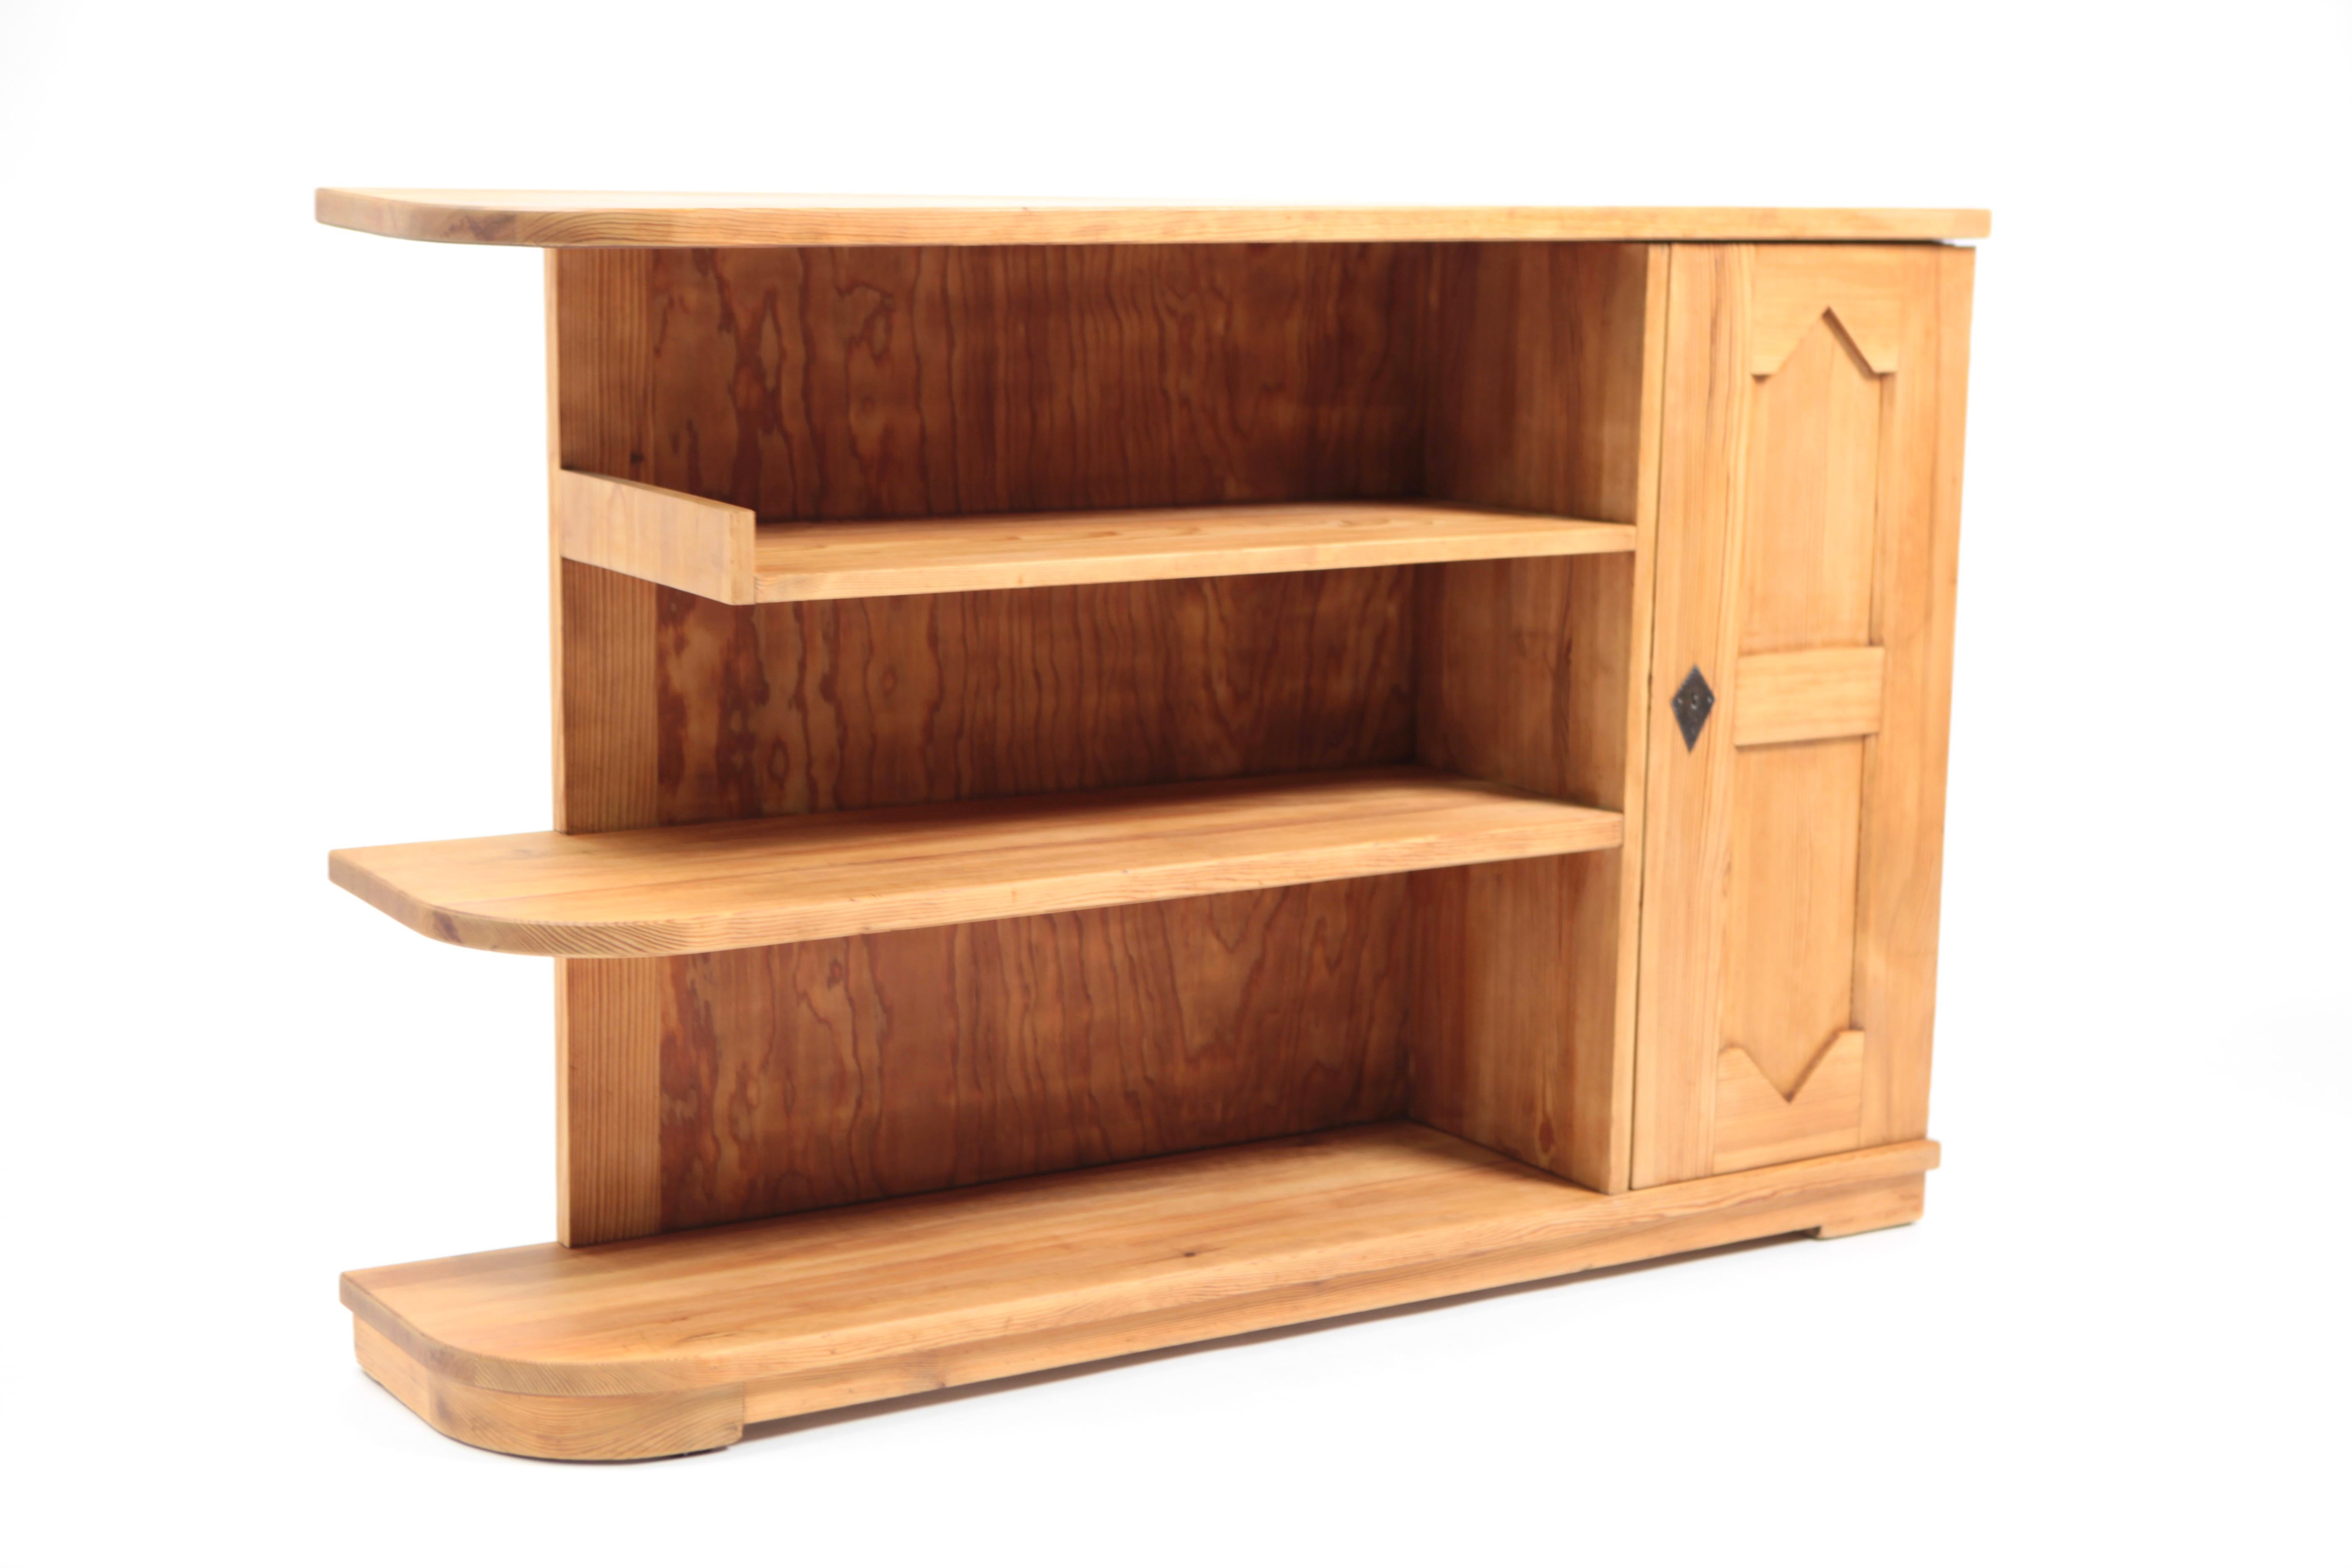 Scandinavian Modern Axel Einar Hjorth, 'Lovö' Bookcase, Acid Stained Pine, Executed by NK in 1939